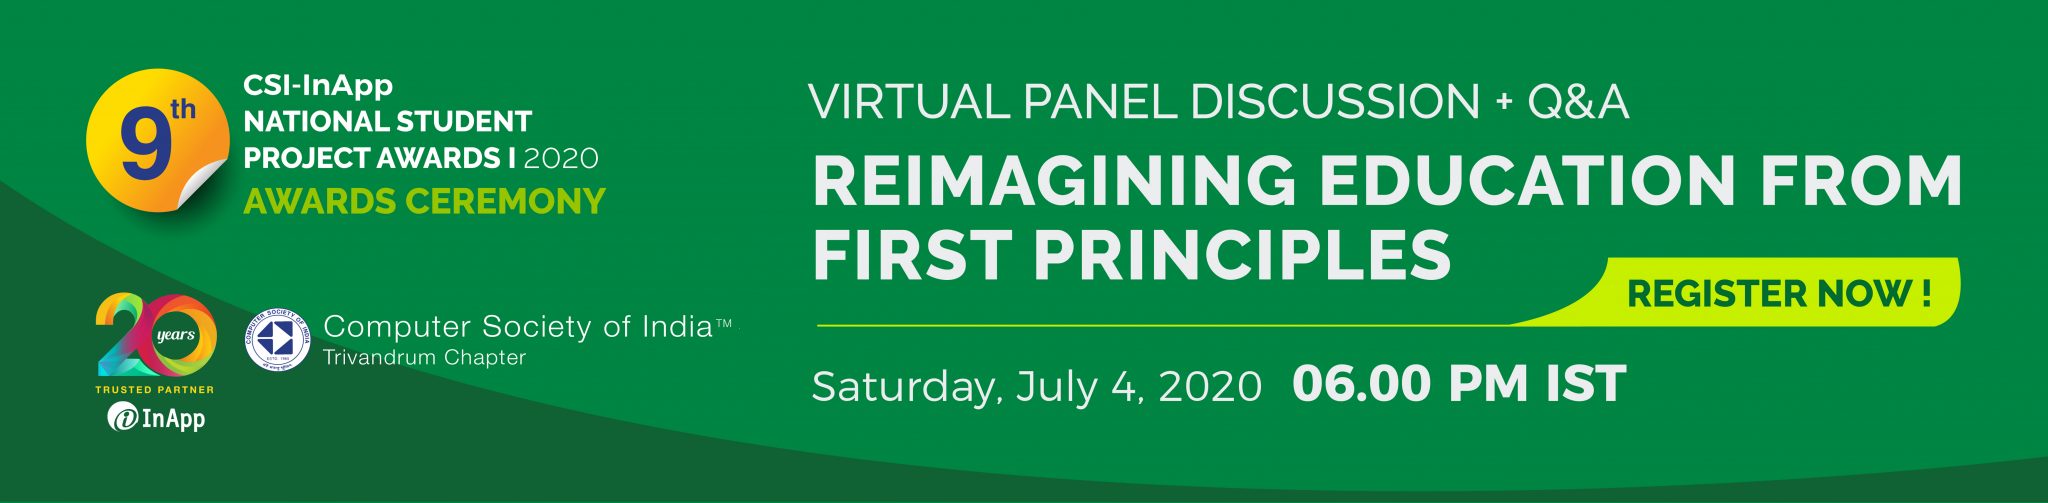 Virtual Panel Discussion on Reimagining Education